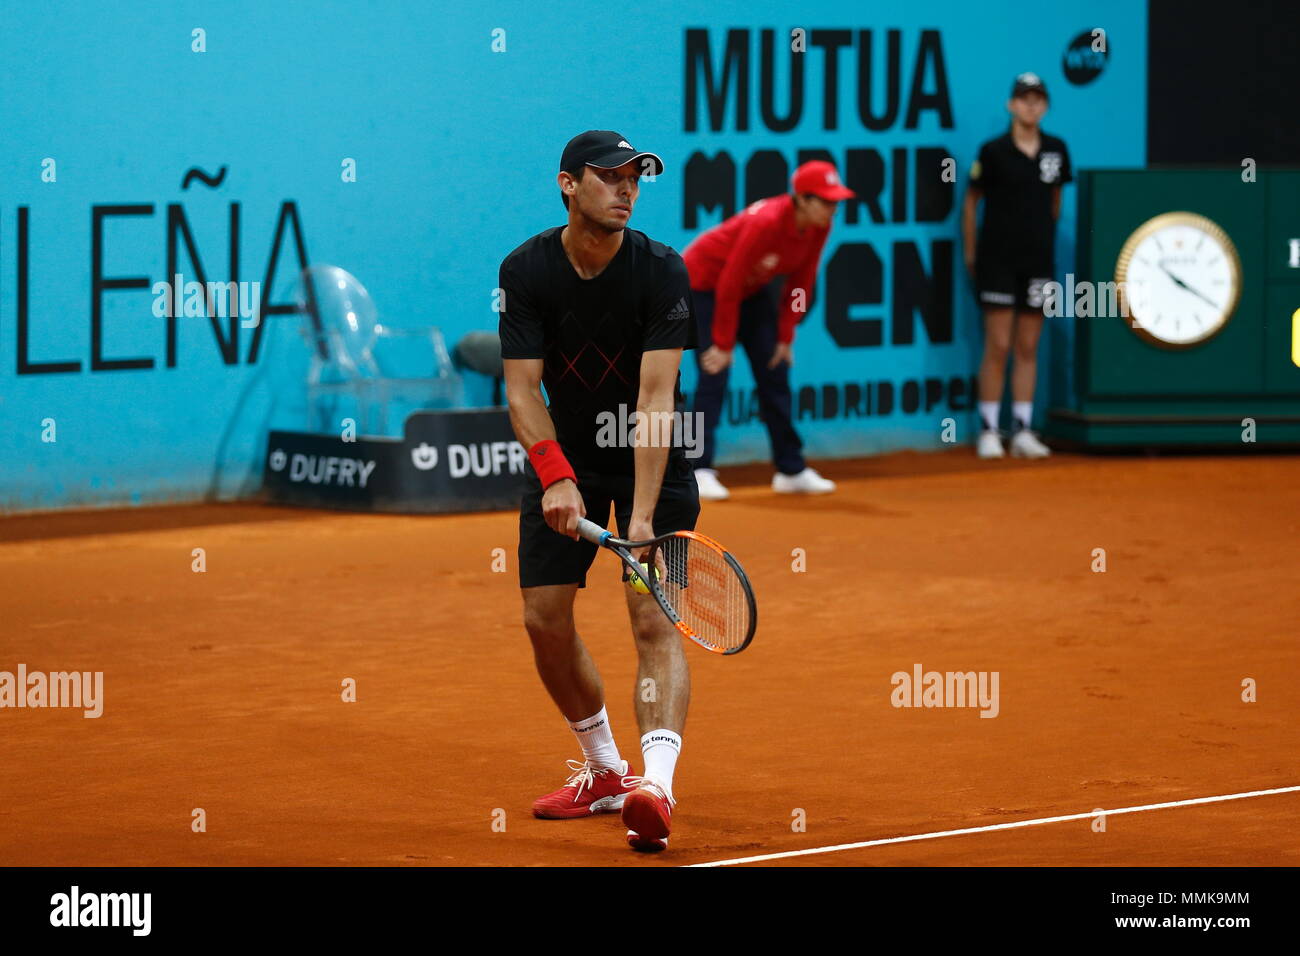 Madrid, Spain, May 10, 2018. 10th May, 2018. Ben McLachlan (JPN) Tennis :  Ben McLachlan of Japan during Doubles 2nd round match against Ivan Dogic of  Croatia and Rajeev Ram of USA